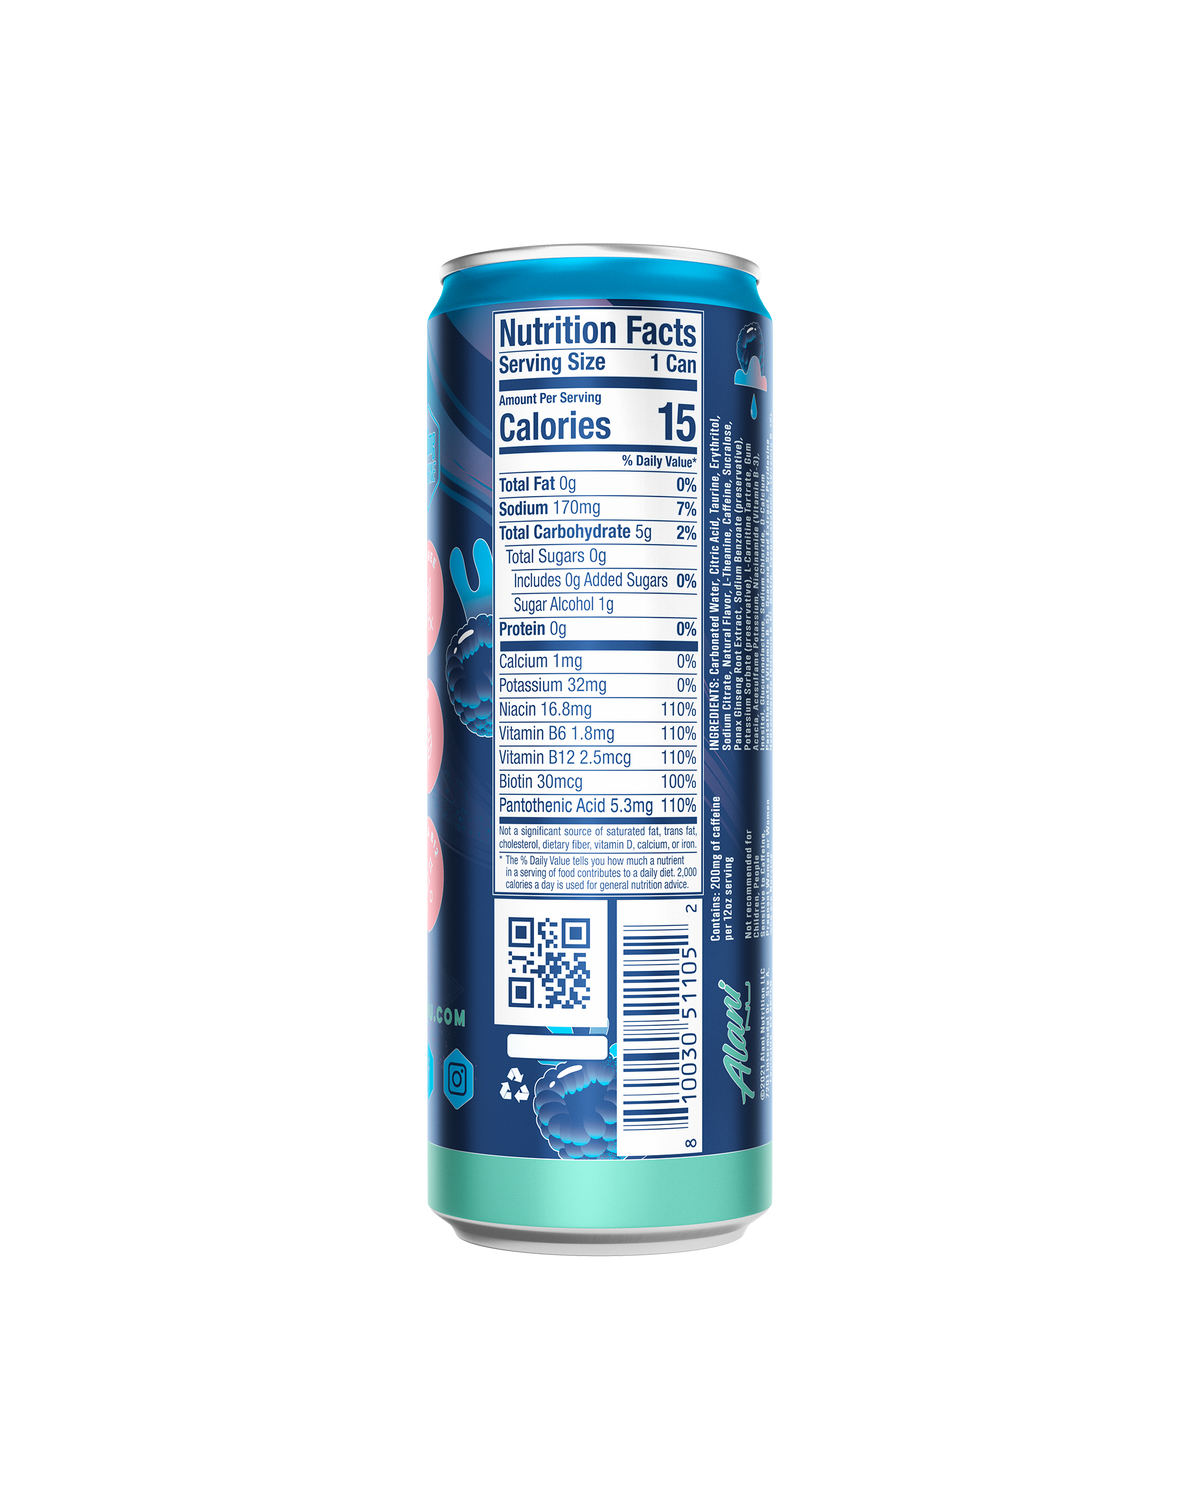 A back view of Energy Drink in Breezeberry flavor highlighting nutrition facts.